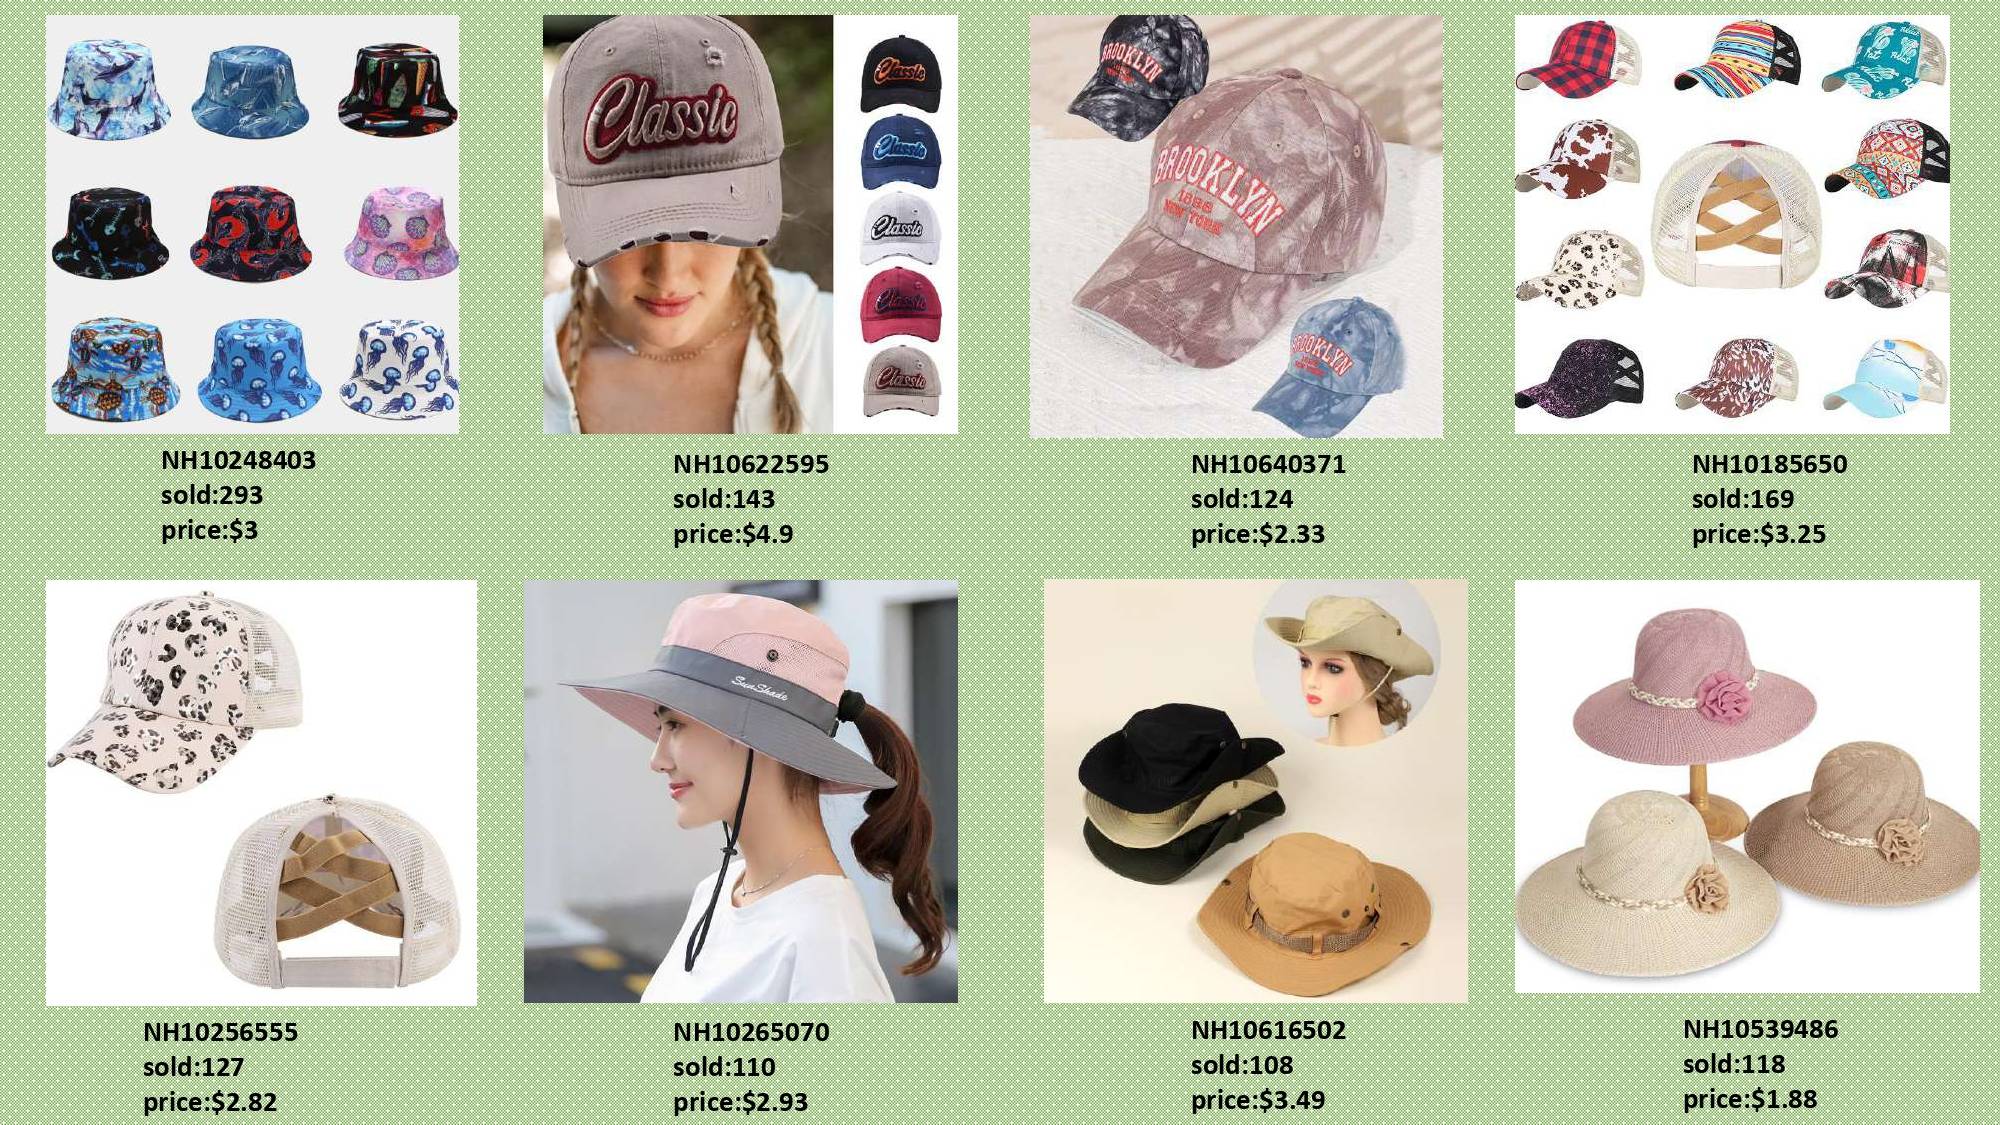 All of fashion hats are cheap and high quality. 